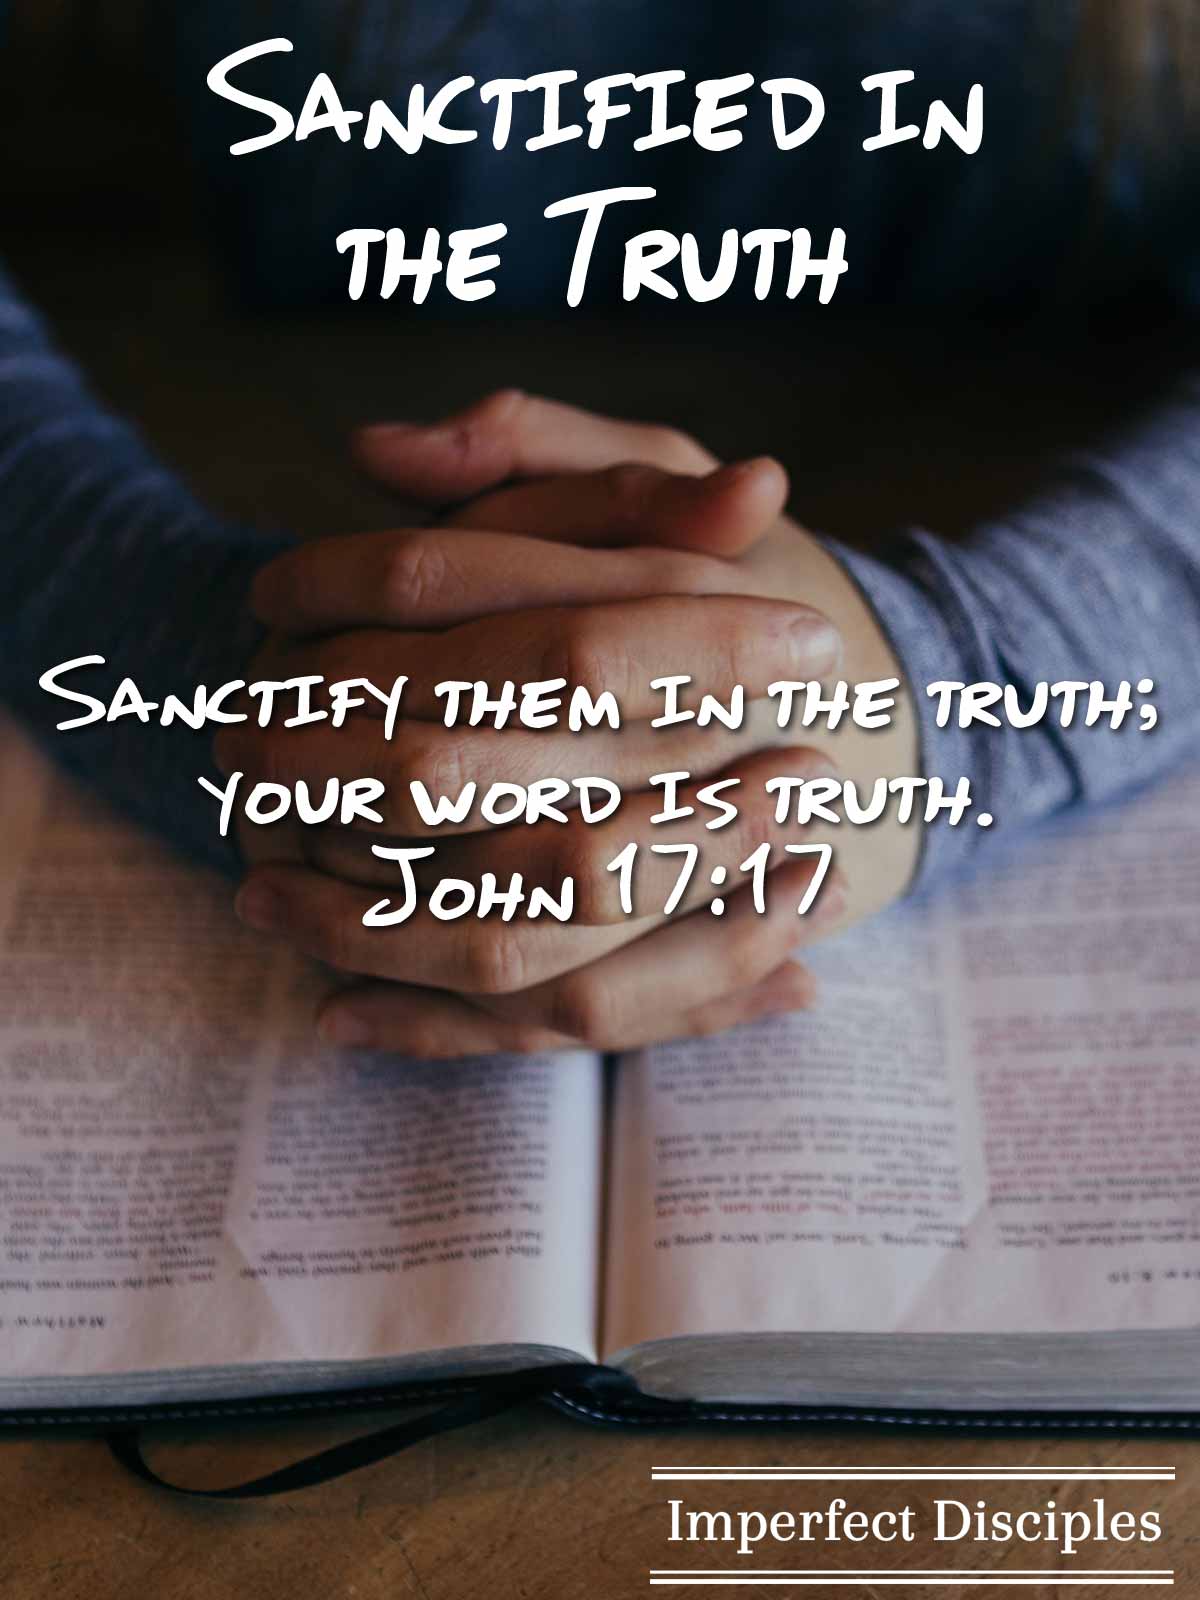 Sanctified in the Truth - John 17:17